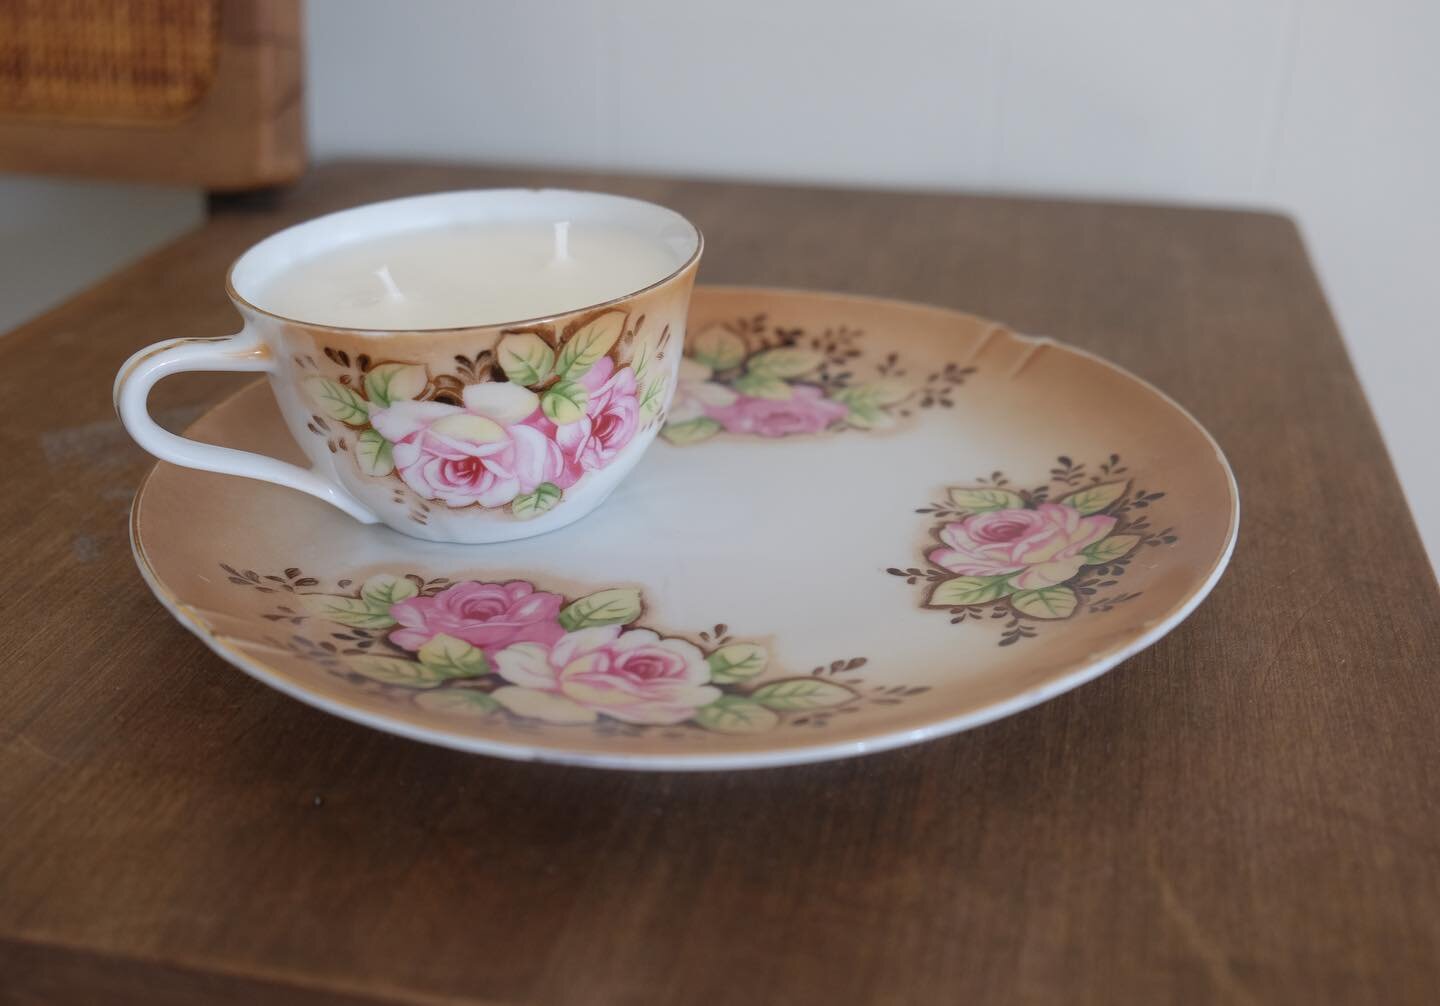 1 AVAILABLE - adorable floral &ldquo;snack set&rdquo; - aka cup and plate! $25 plus shipping. Comment SOLD to claim! #sollysundriesavail